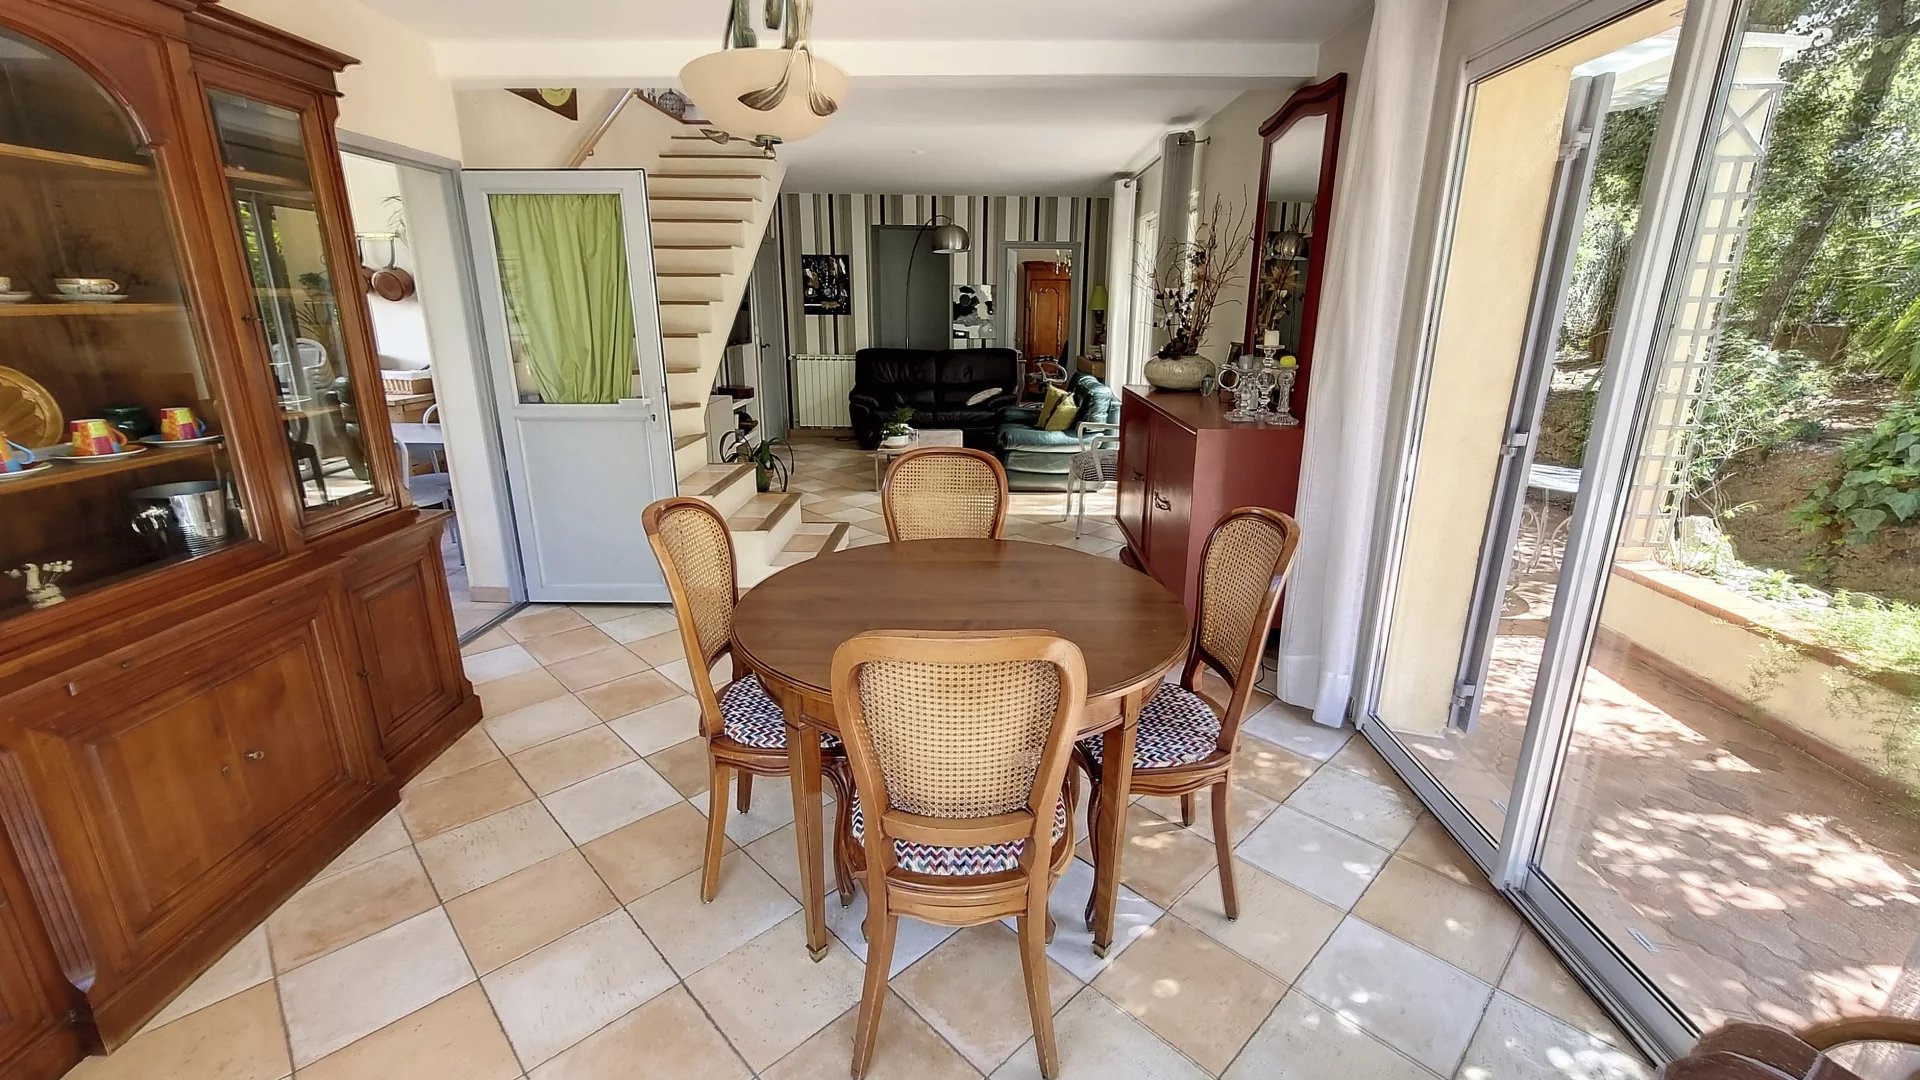 7-ROOM HOUSE 165m² IN QUIET GRASSE ST-JACQUES